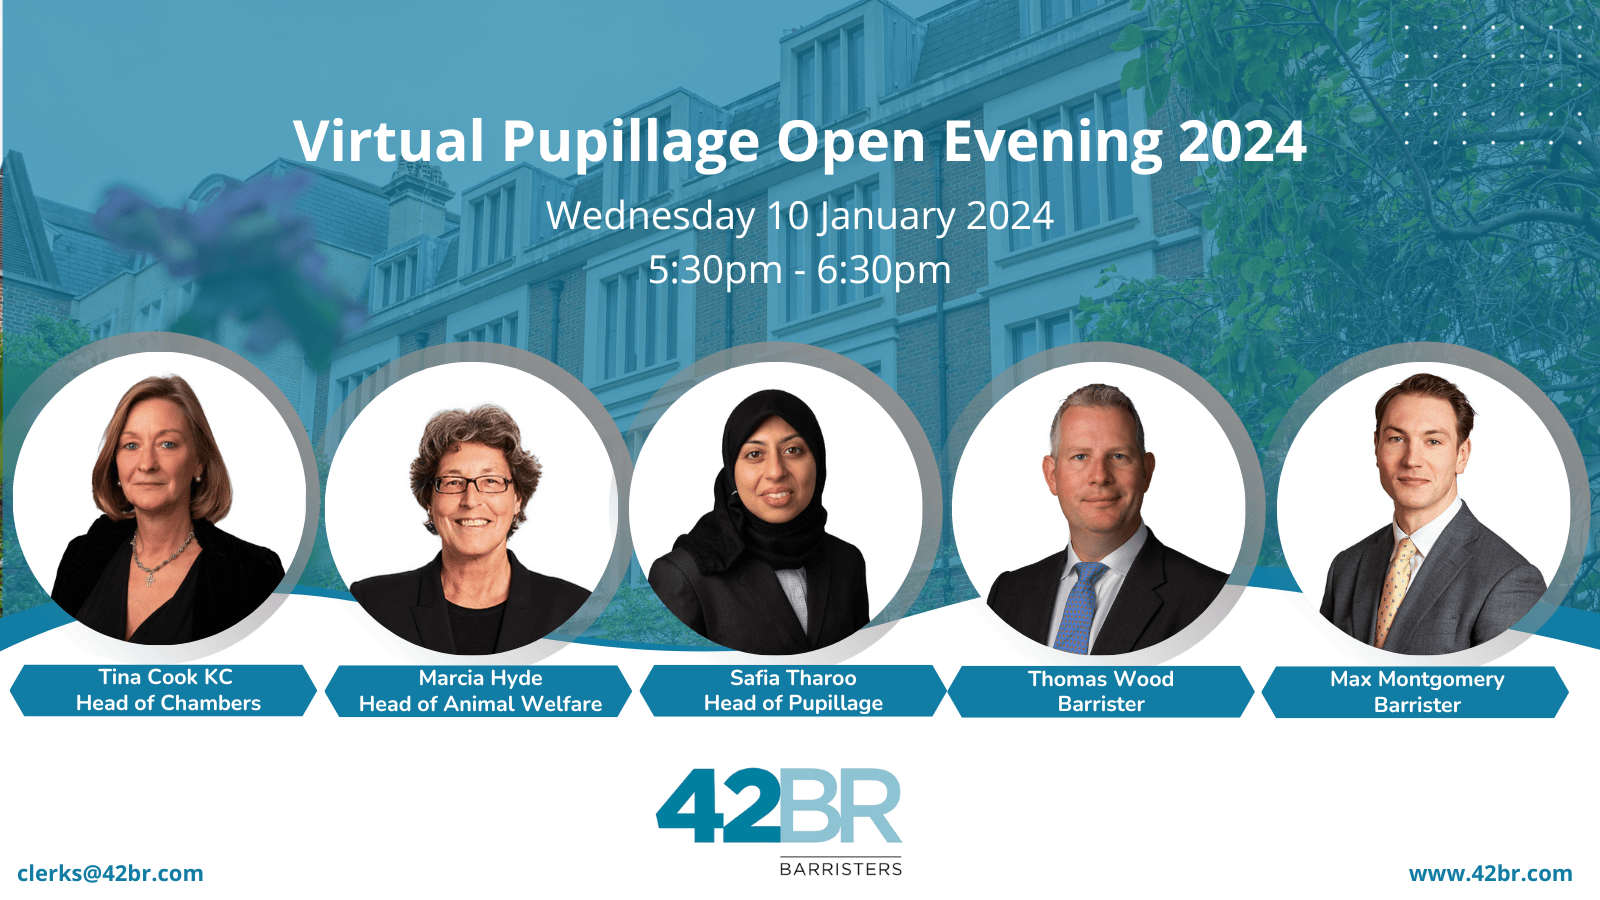 42BR's Virtual Pupillage Open Evening 2024